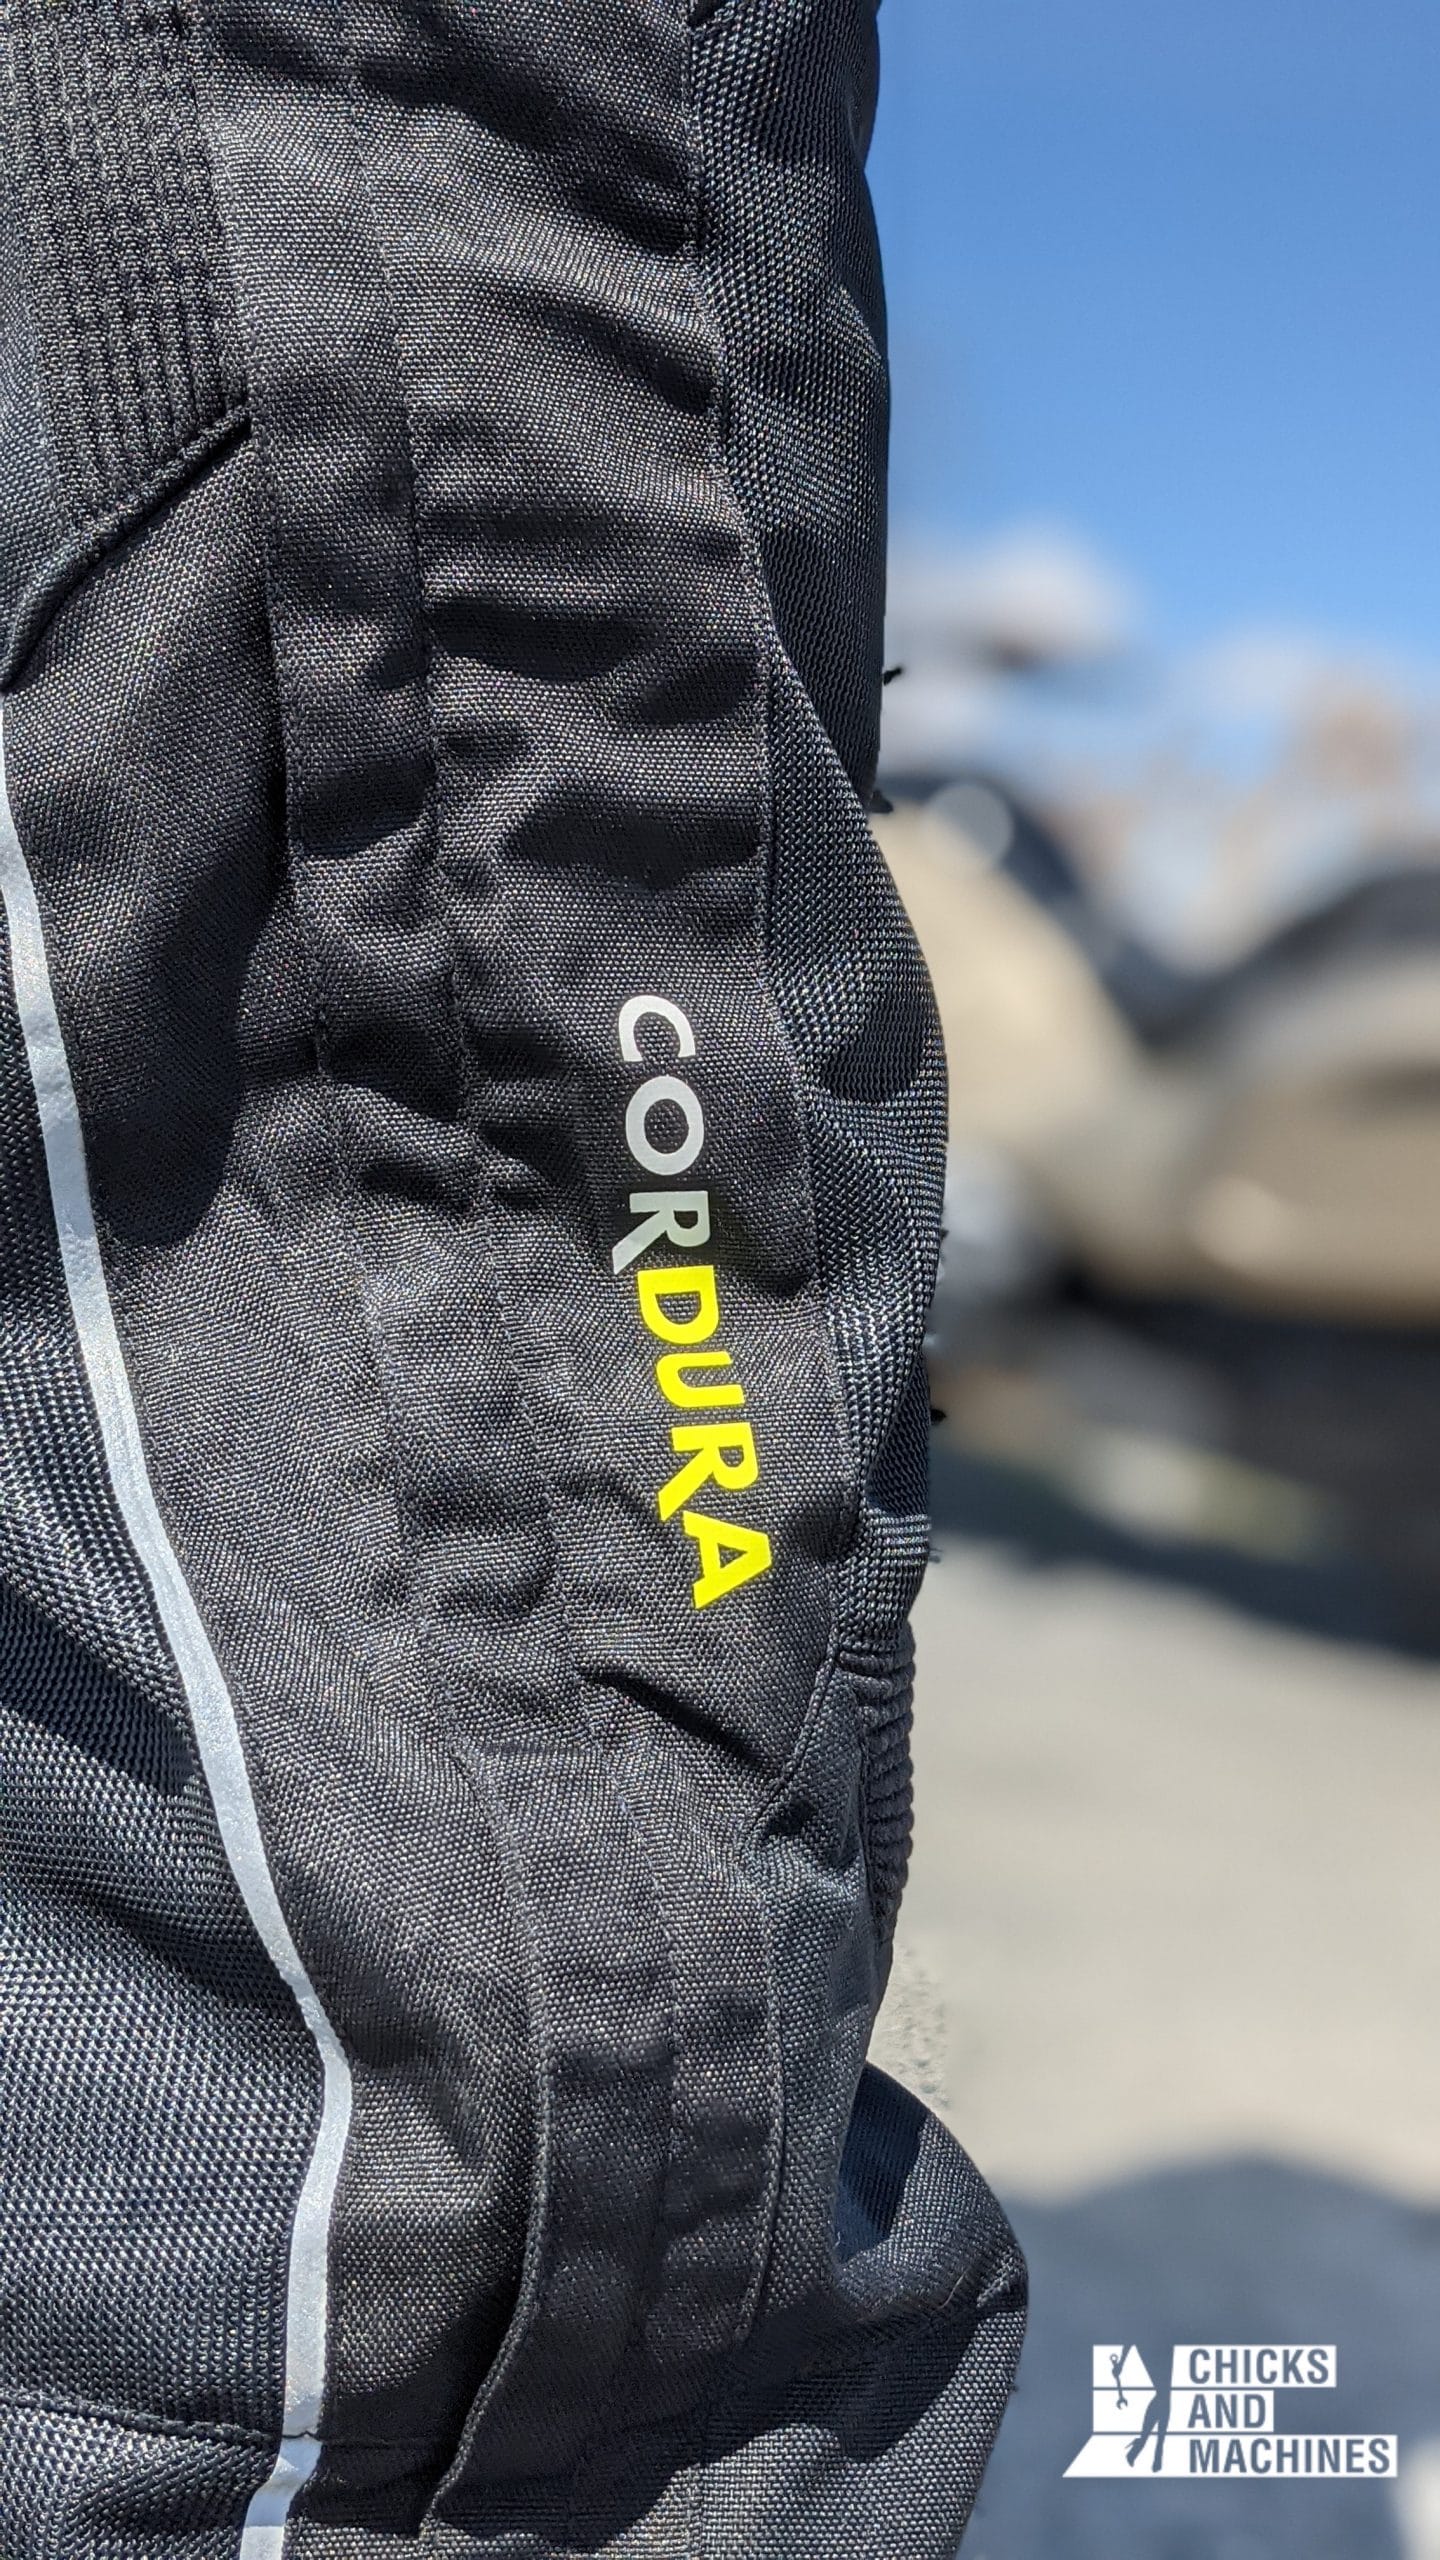 Olympia's Airglide 6 Pants reflective strips